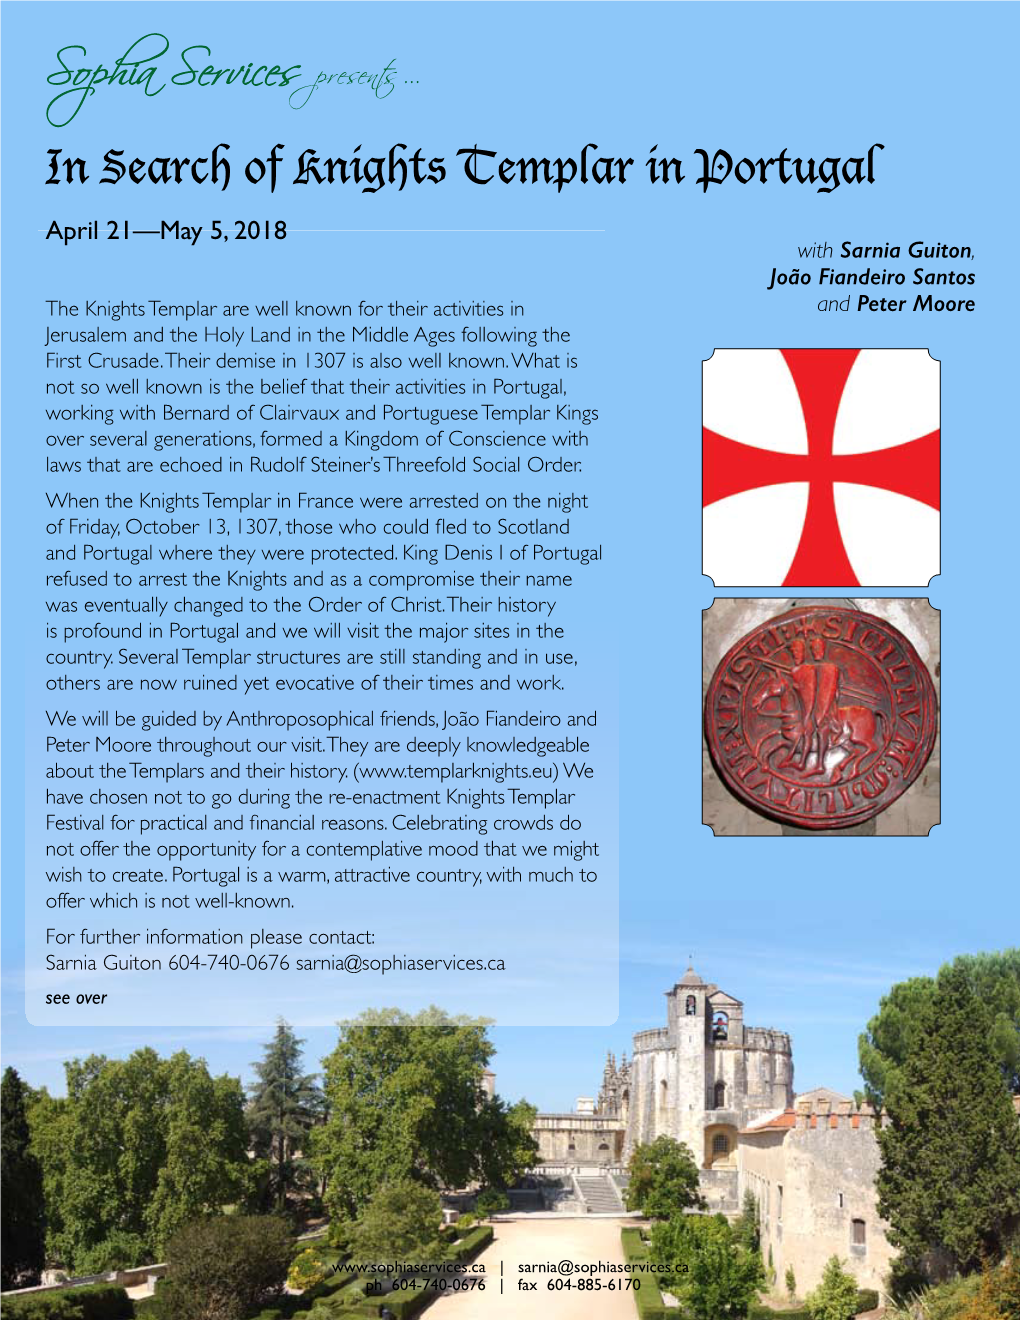 In Search of Knights Templar in Portugal